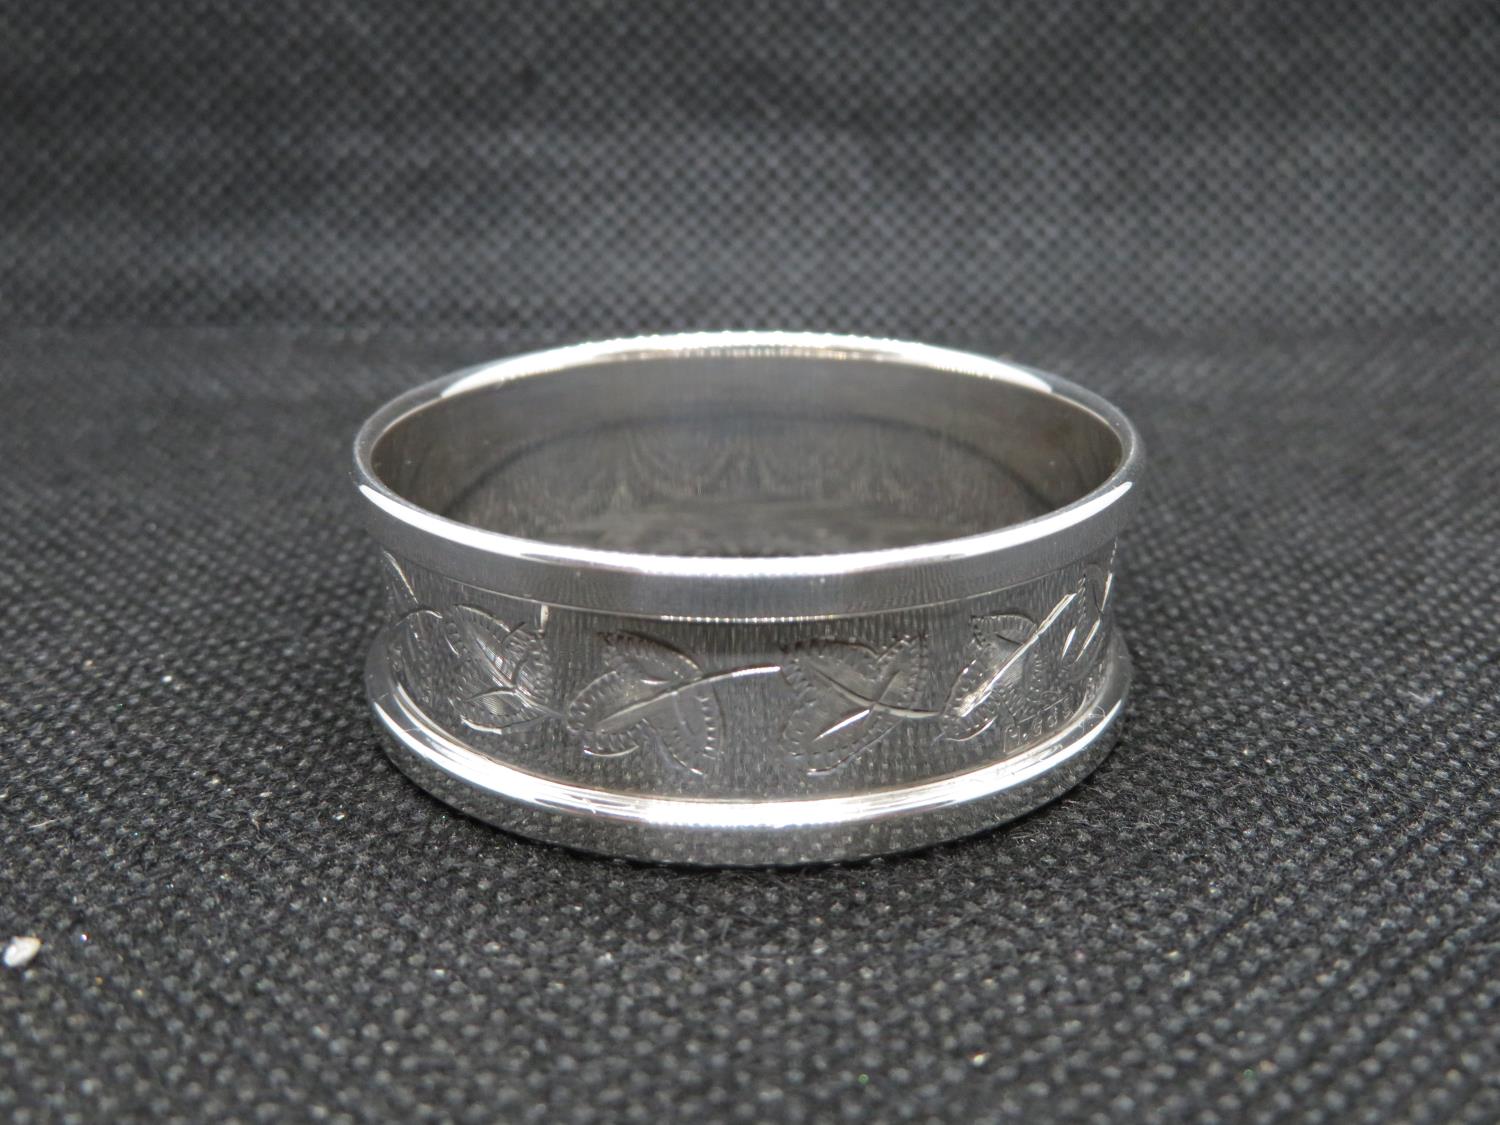 Vintage silver napkin ring with vacant cartouche Birmingham 1970 - Image 2 of 2